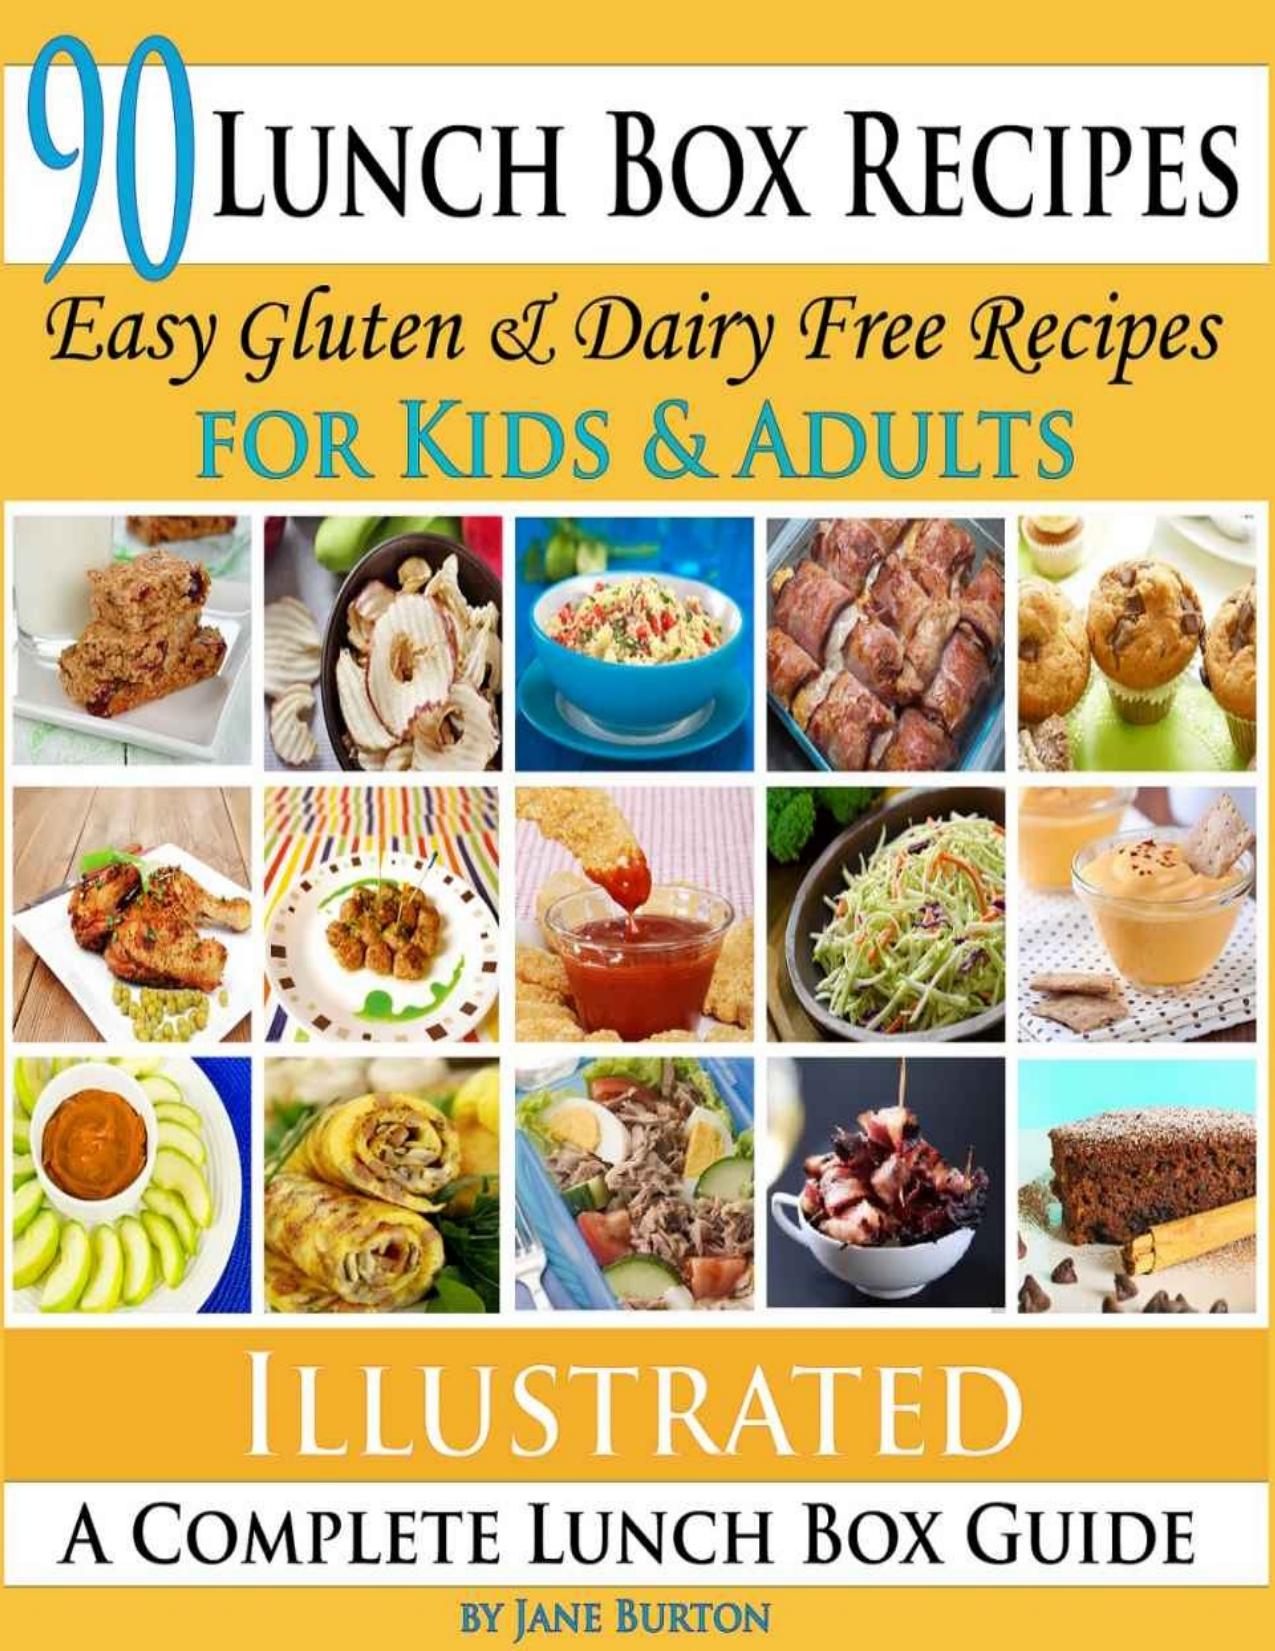 90 lunch box recipes : healthy lunchbox recipes for kids : a common sense guide \& gluten free paleo lunch box cookbook for school \& work - PDFDrive.com